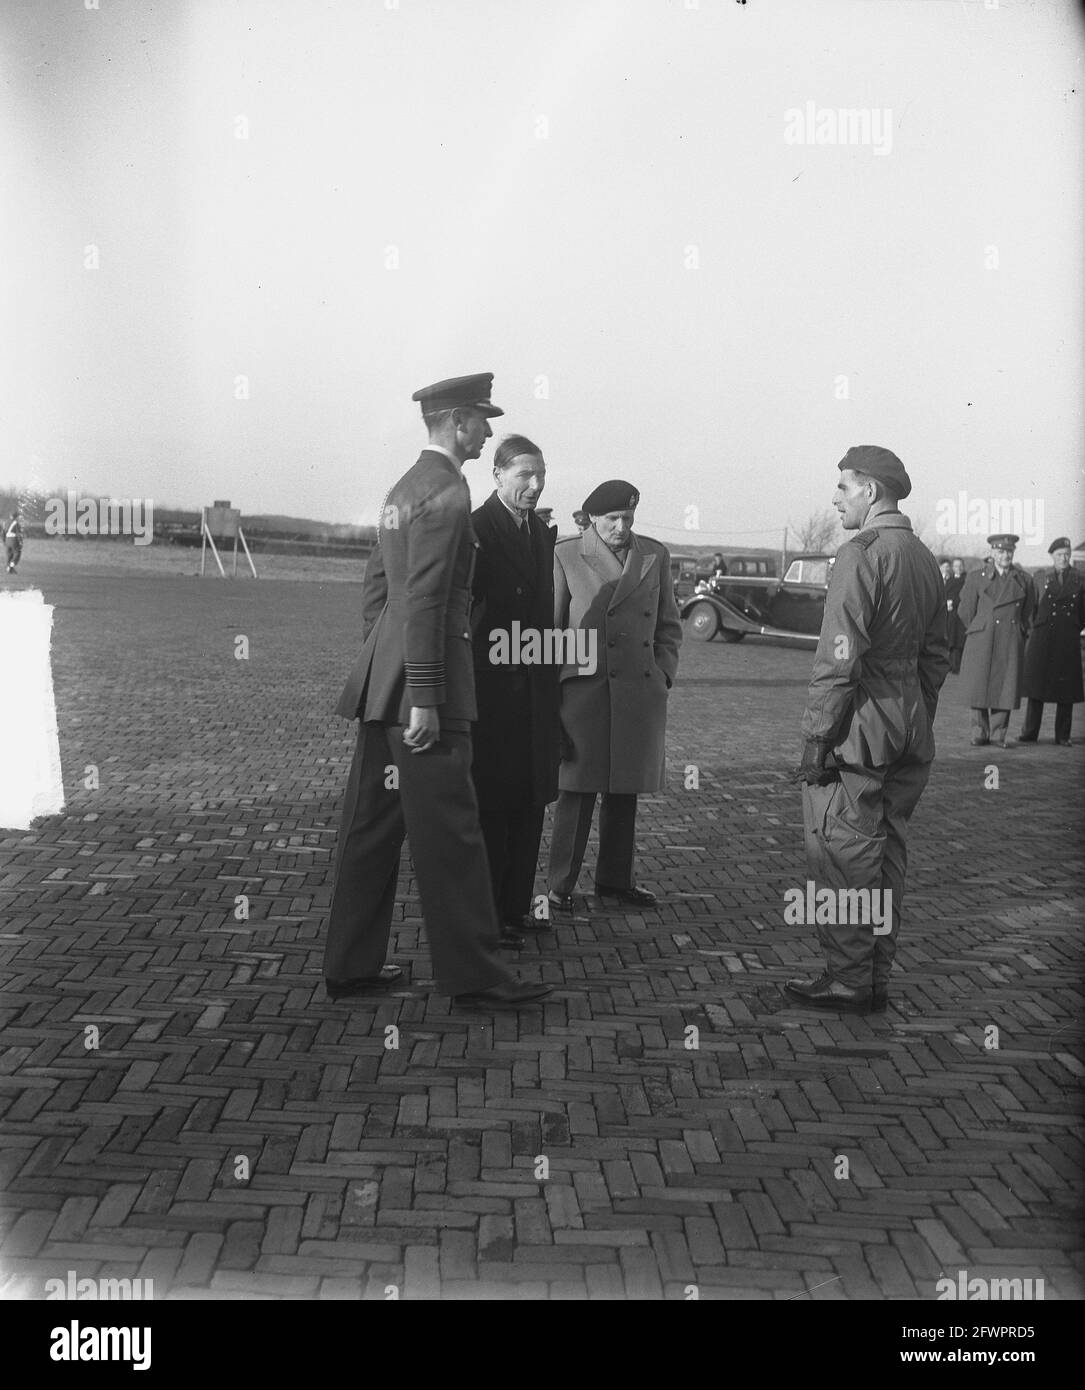 Montgomery arrives at Valkenburg airfield. Montgomery with pilot and British Ambassador, January 15, 1949, pilots, airfields, The Netherlands, 20th century press agency photo, news to remember, documentary, historic photography 1945-1990, visual stories, human history of the Twentieth Century, capturing moments in time Stock Photo